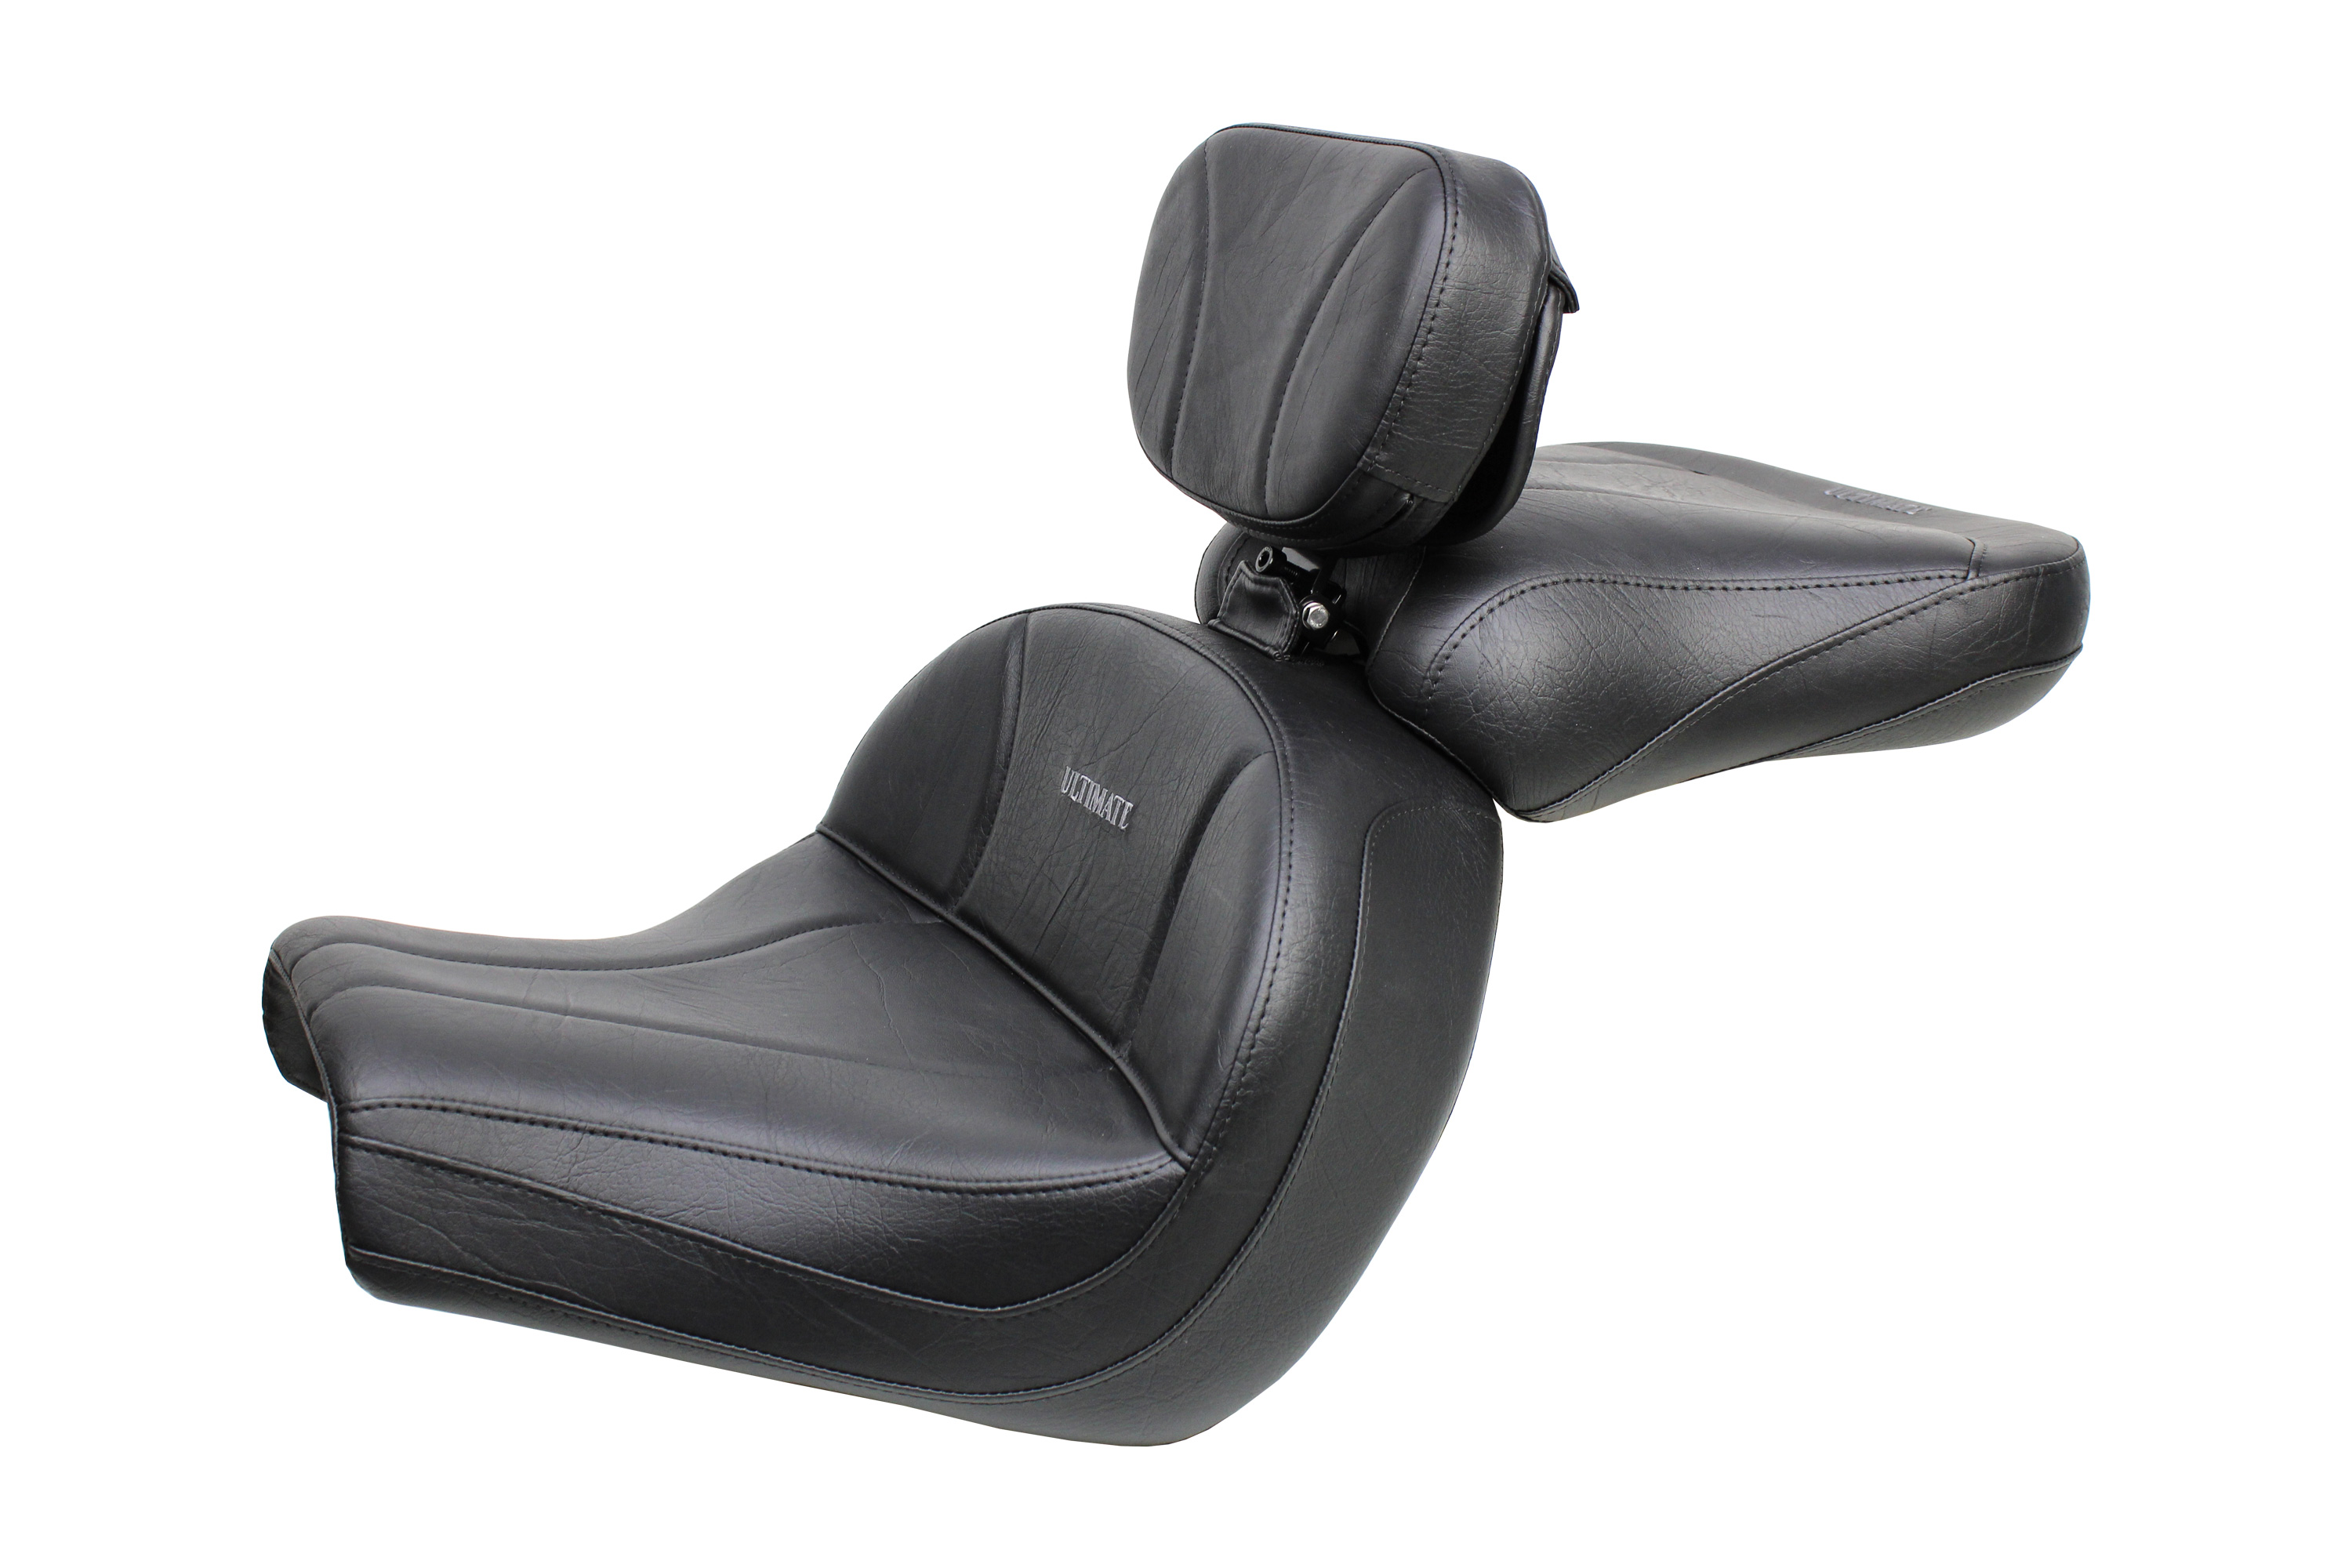 VTX 1300 C Lowrider Seat, Passenger Seat and Driver Backrest - Plain or Studded